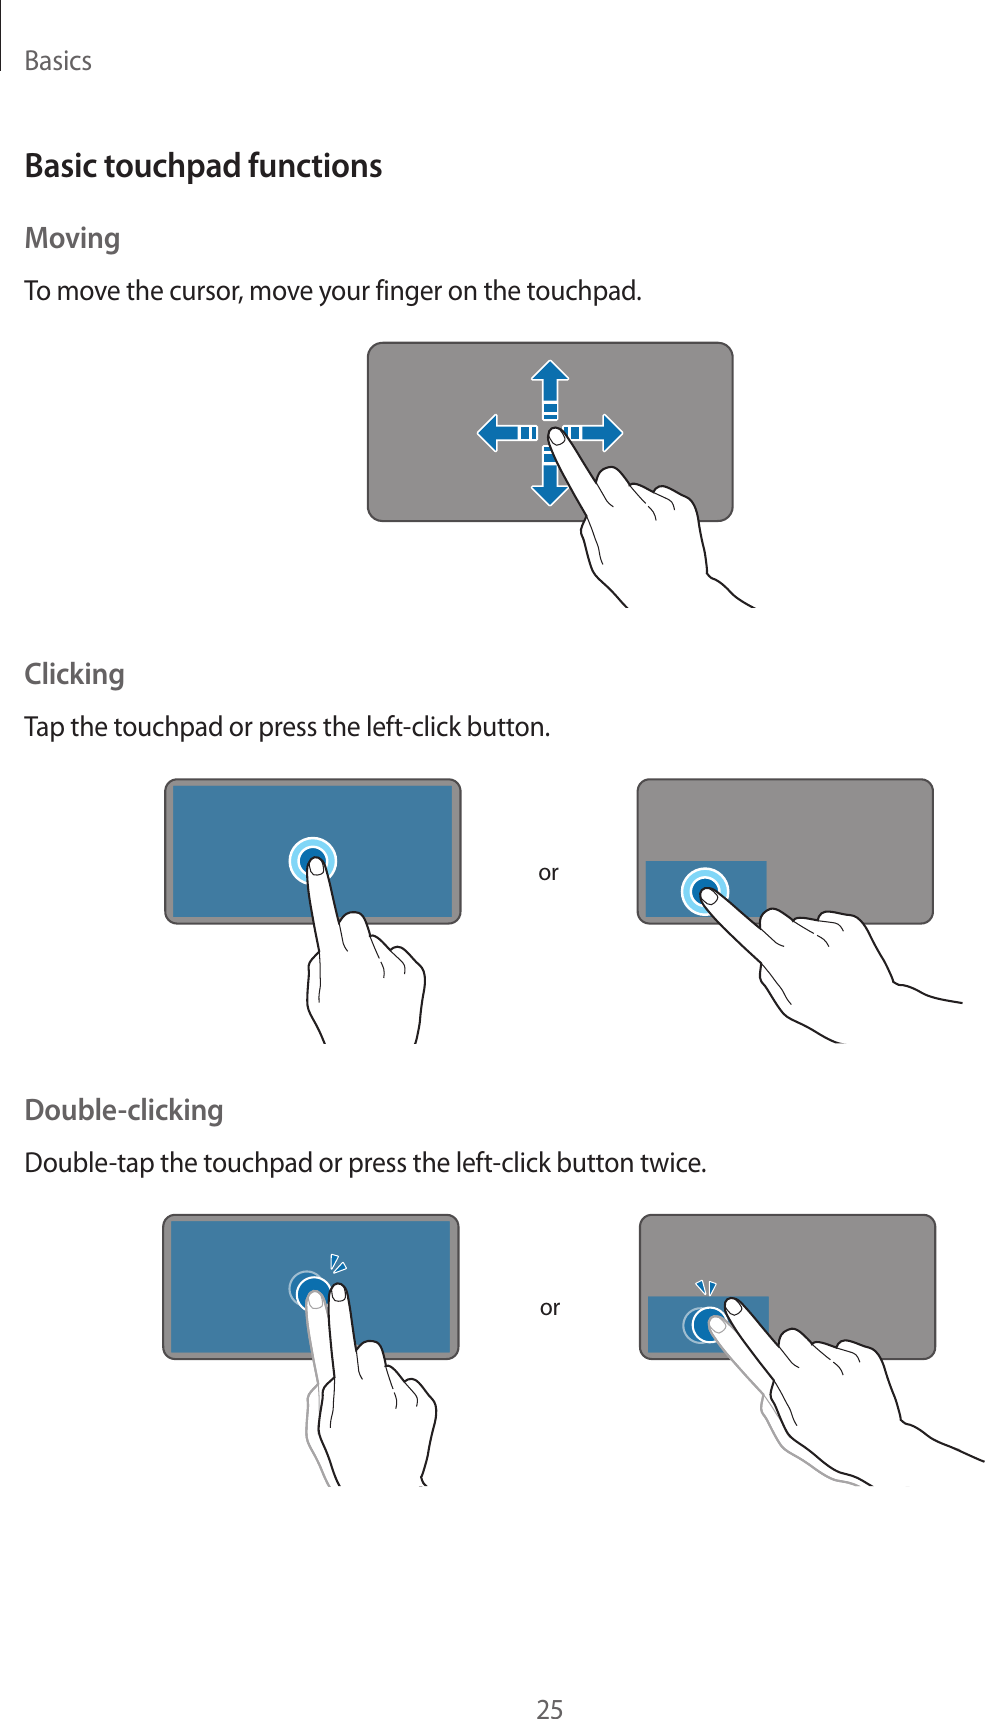 Basics25Basic touchpad functionsMovingTo move the cursor, move your finger on the touchpad.ClickingTap the touchpad or press the left-click button.orDouble-clickingDouble-tap the touchpad or press the left-click button twice.or